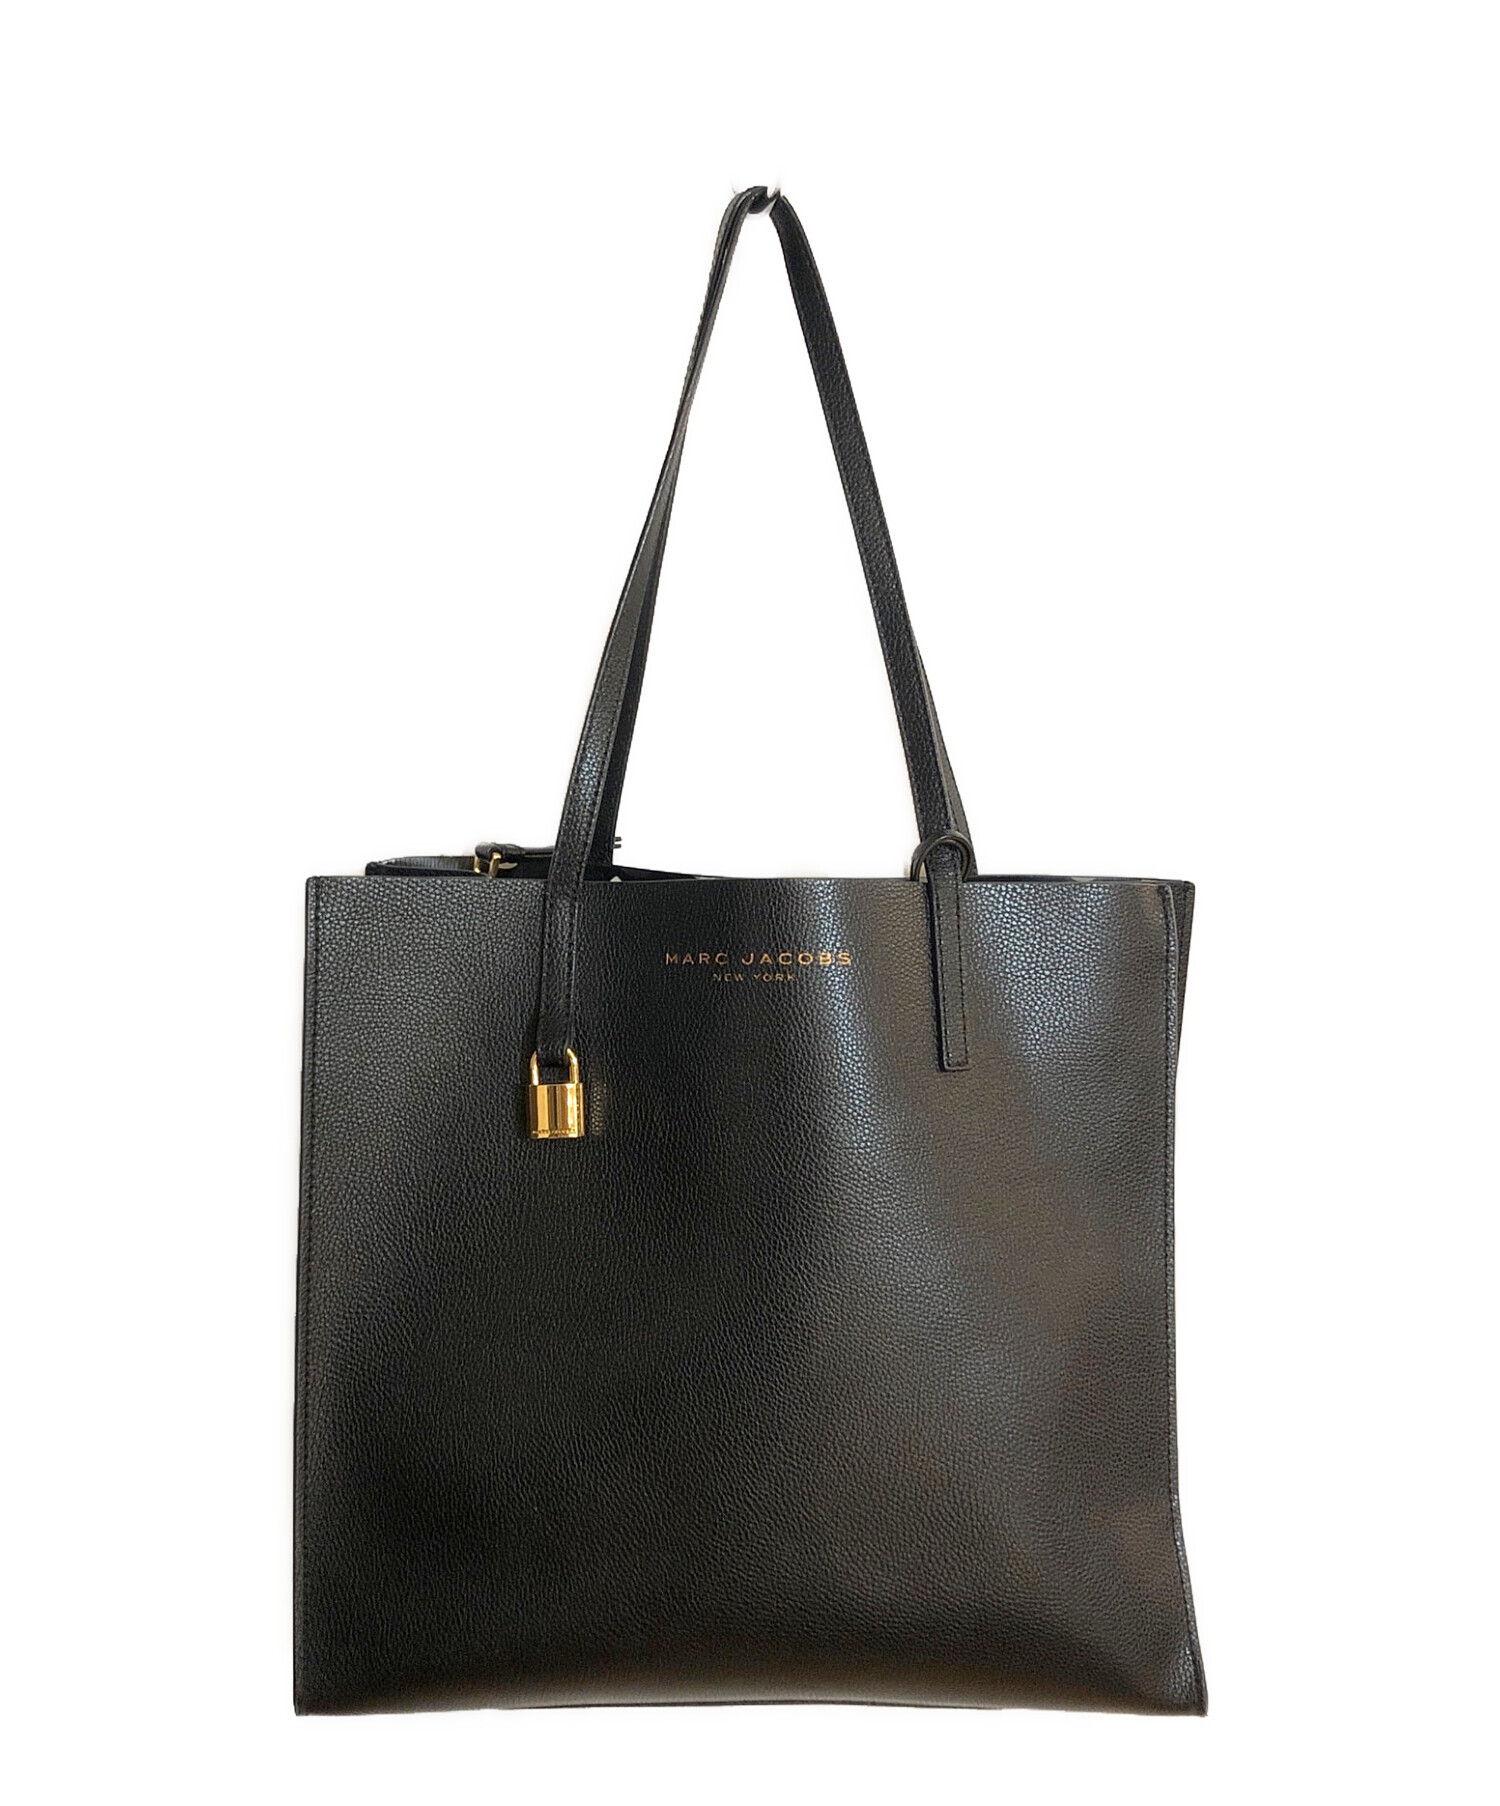 MARC JACOBS (マーク ジェイコブス) THE GRIND TOTE BAG/ザグラインドトートバッグ